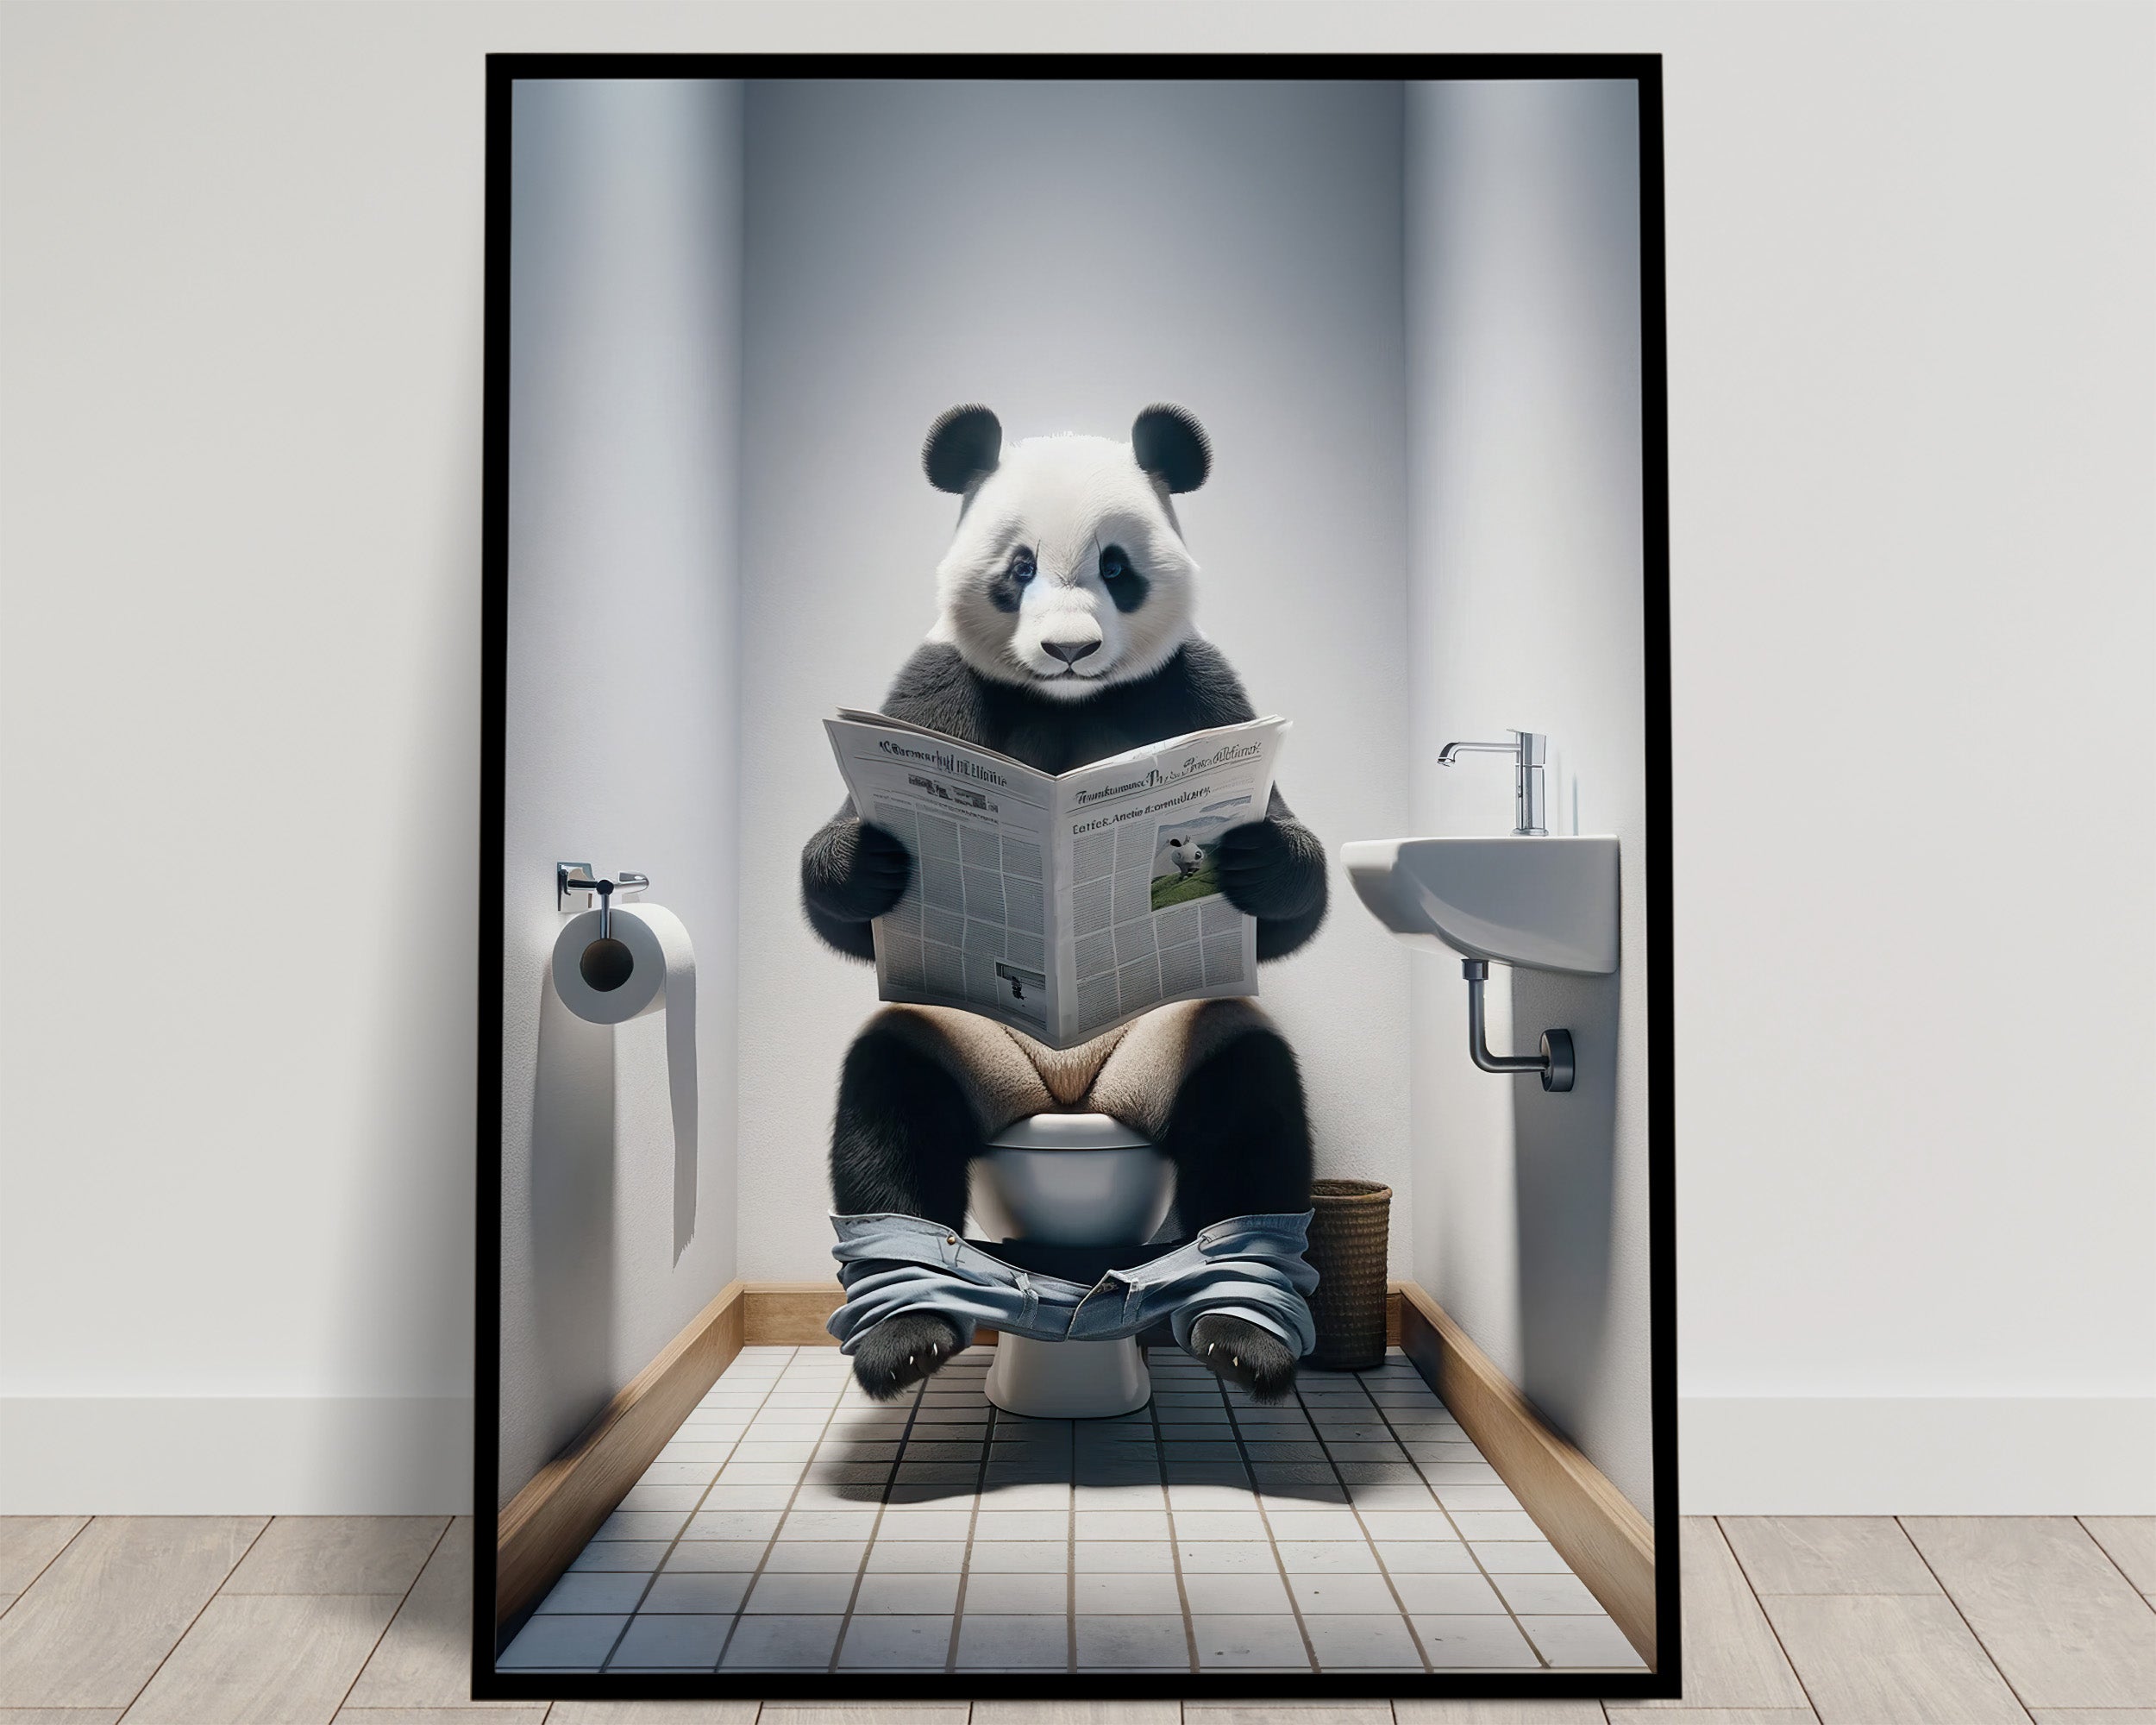 Photograph of a Panda reading the newspaper on the Toilet, Funny Bathroom  Decor, Bathroom Wall Art, WC Toilet Poster, Unique Funny Gift